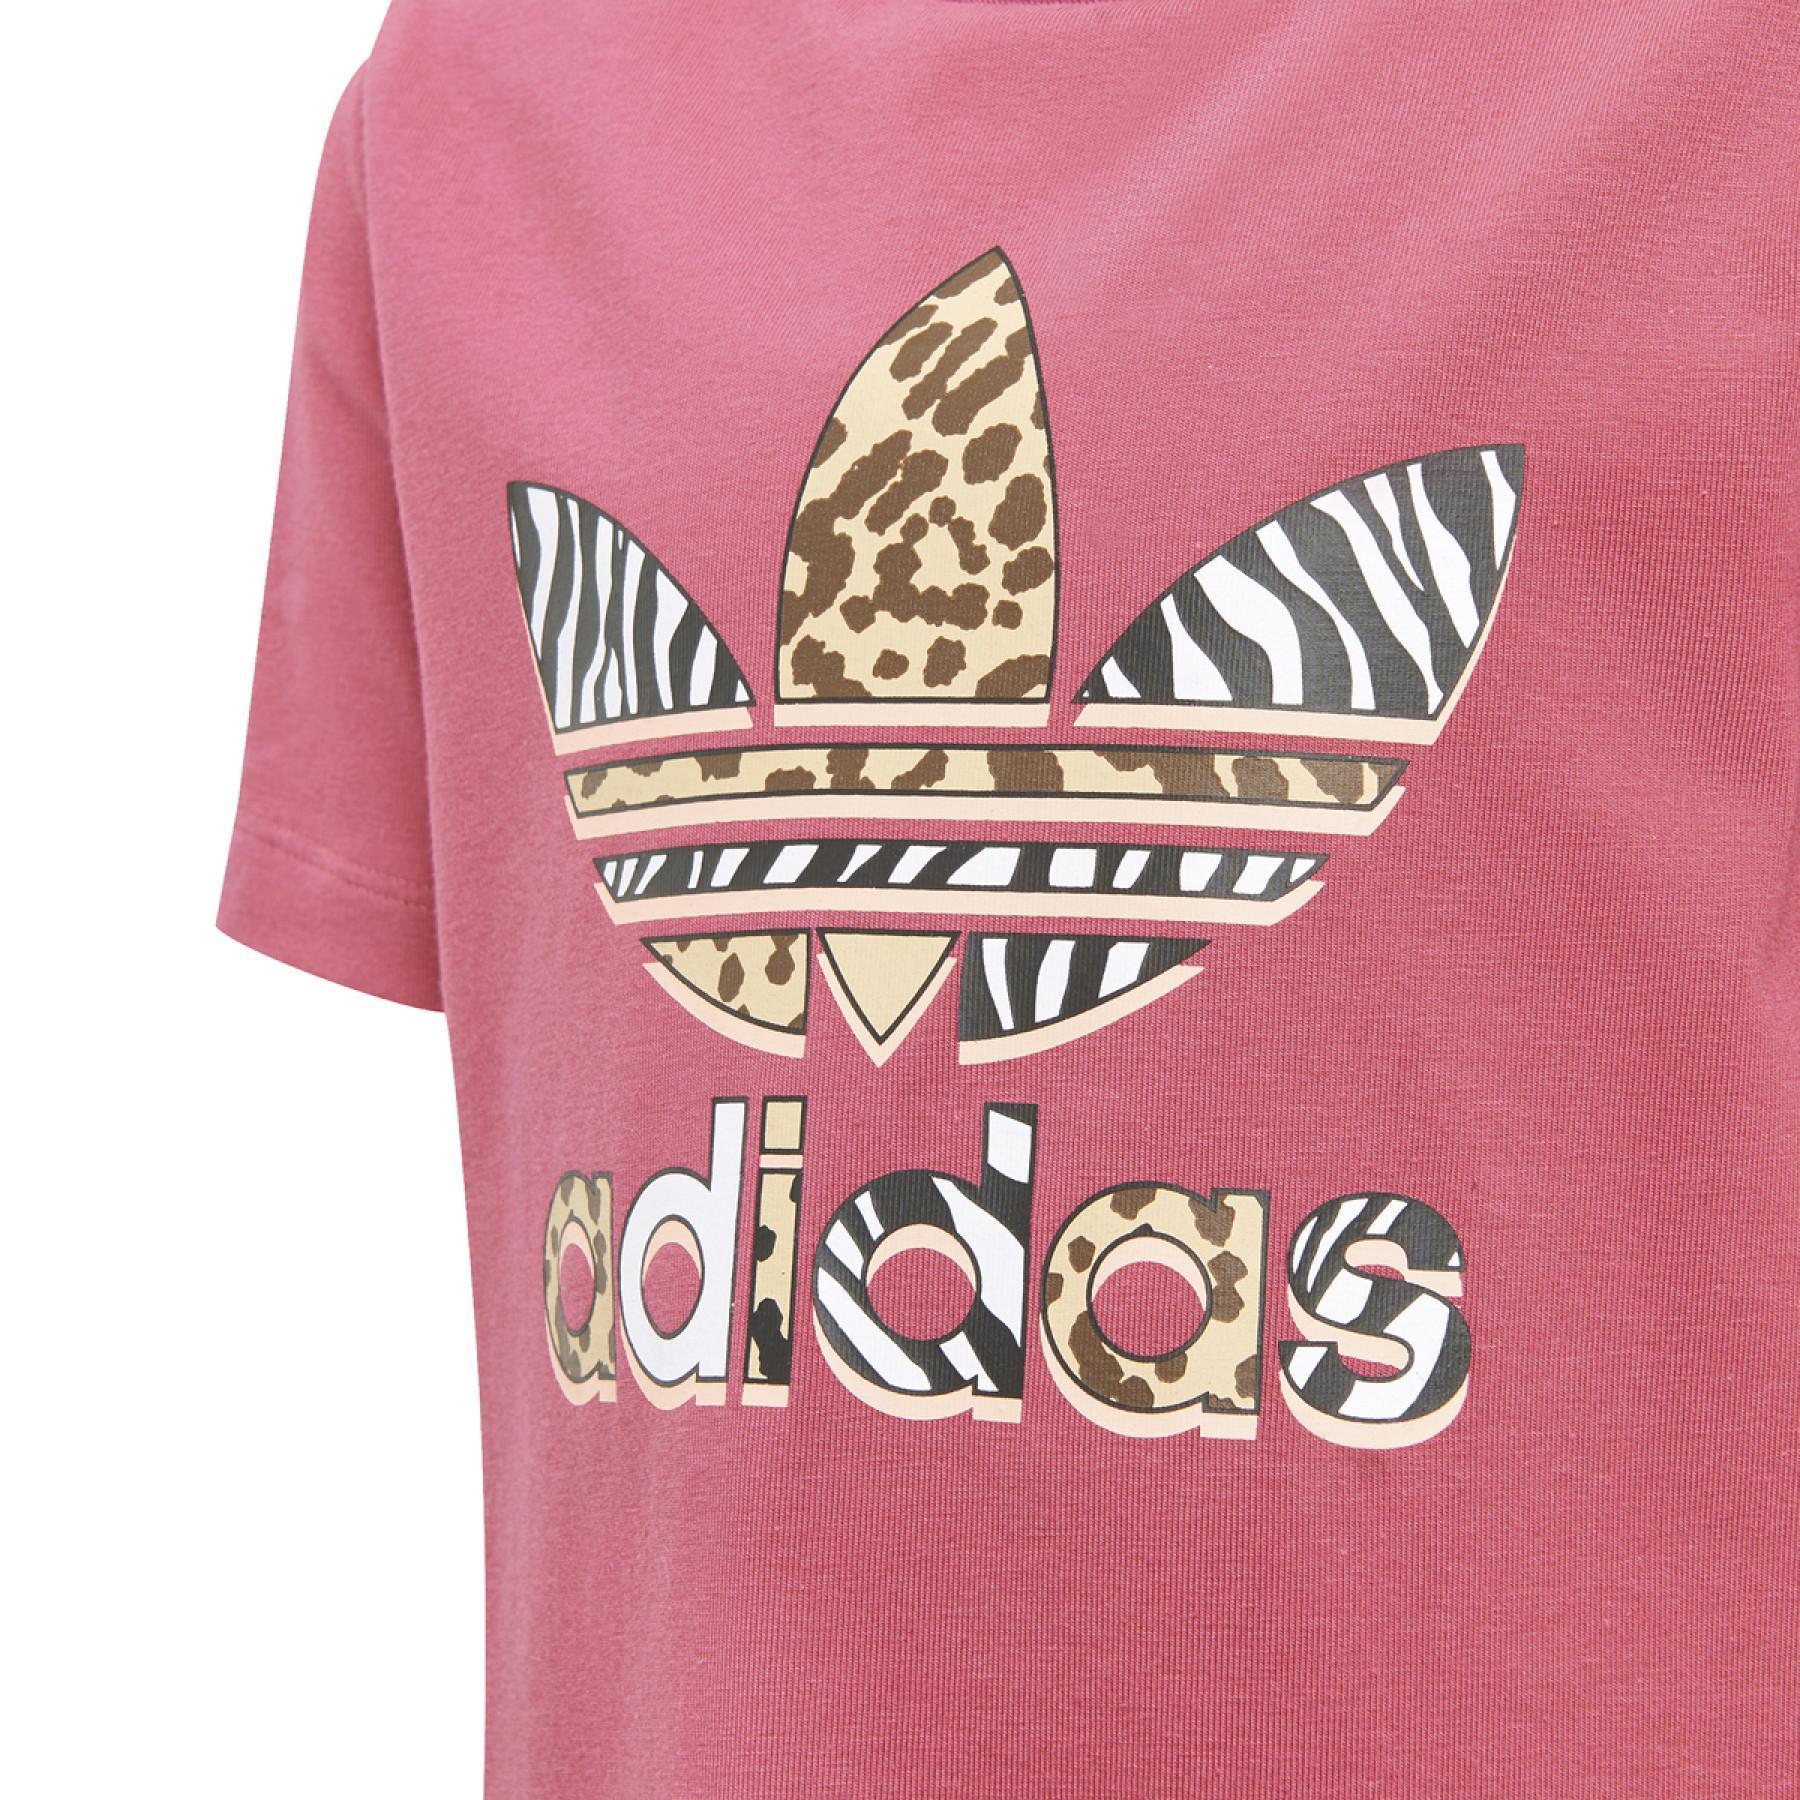 Girl's outfit adidas Originals Her Studio London Florale